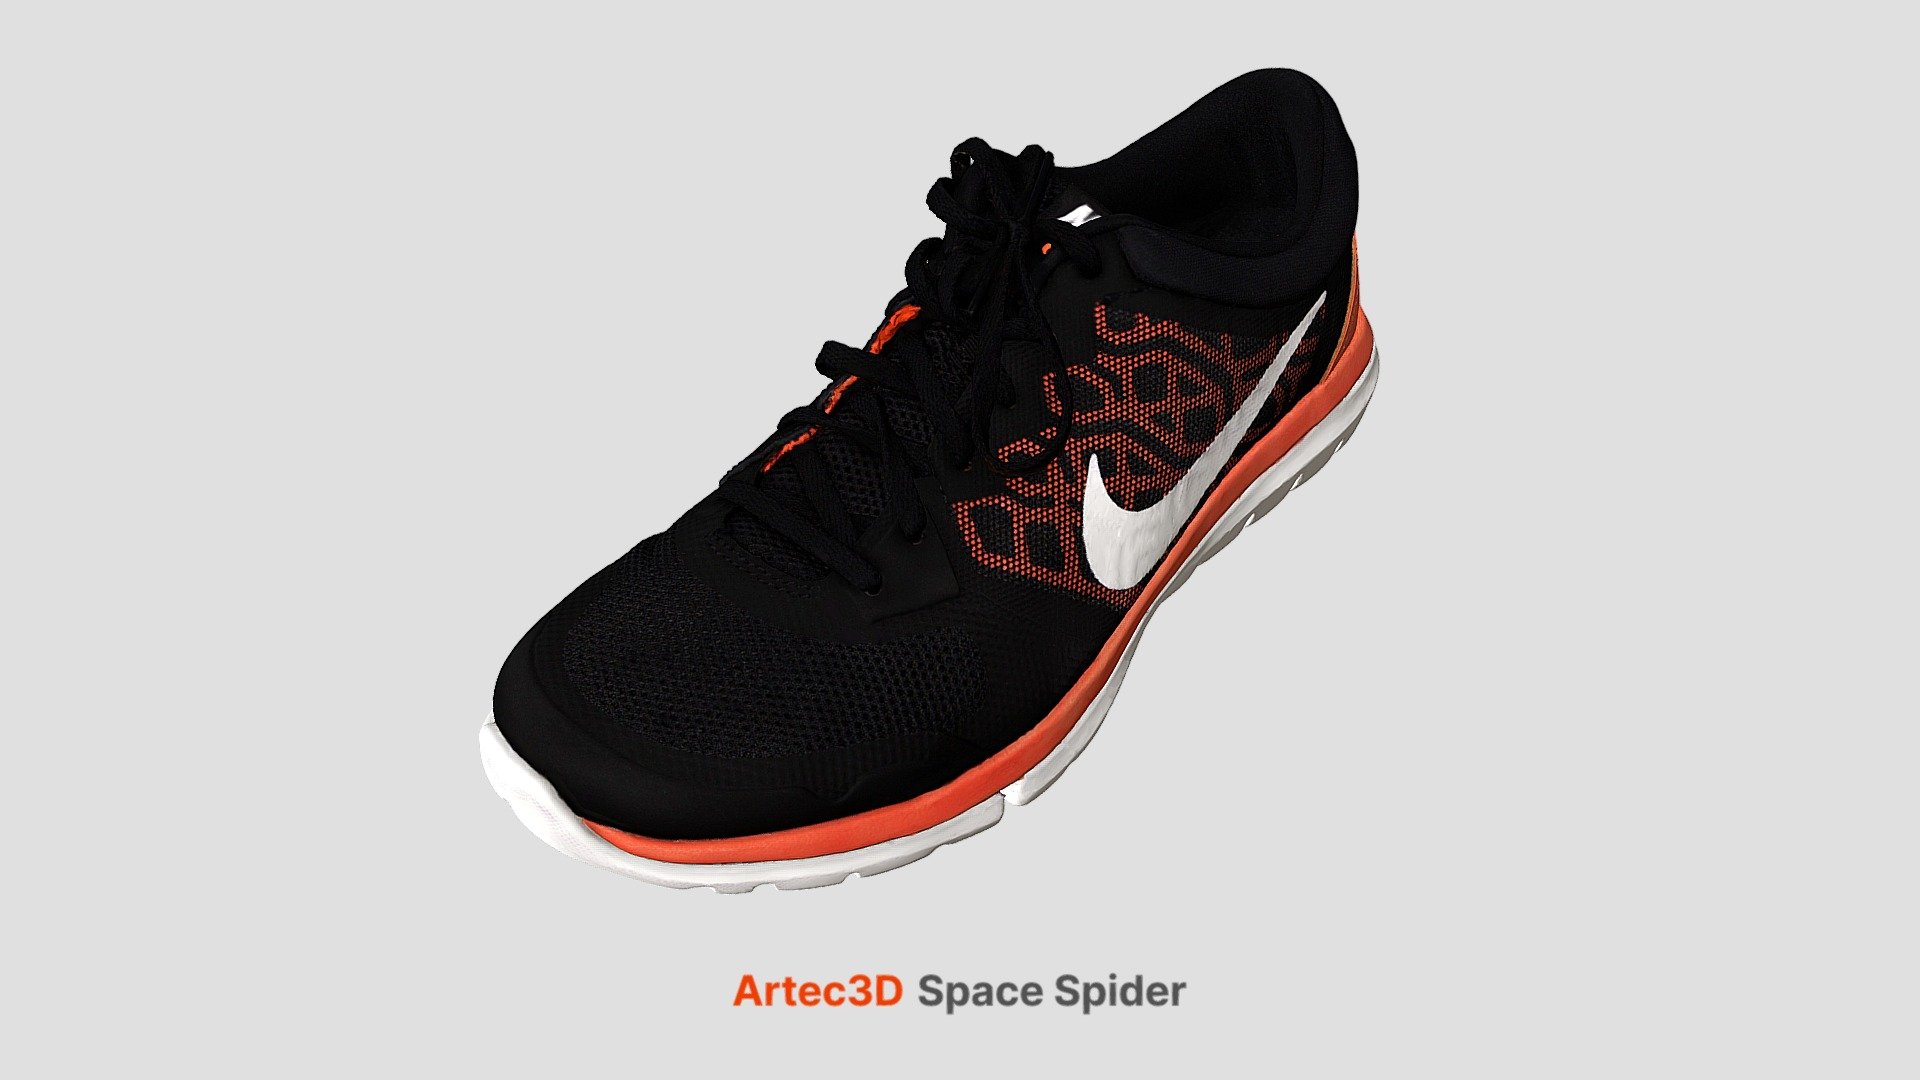 This Nike shoe was scanned using the Artec Space Spider in just a pocketful of minutes. As you can see even when zooming in to the max, all the shoe's laces and usually-challenging geometries were perfectly captured. The black surfaces and unusual fabrics of the shoe proved to be no match for Space Spider's all-seeing eyes. The scans were processed in Artec Studio software shortly thereafter and turned into this 3D model 3d model